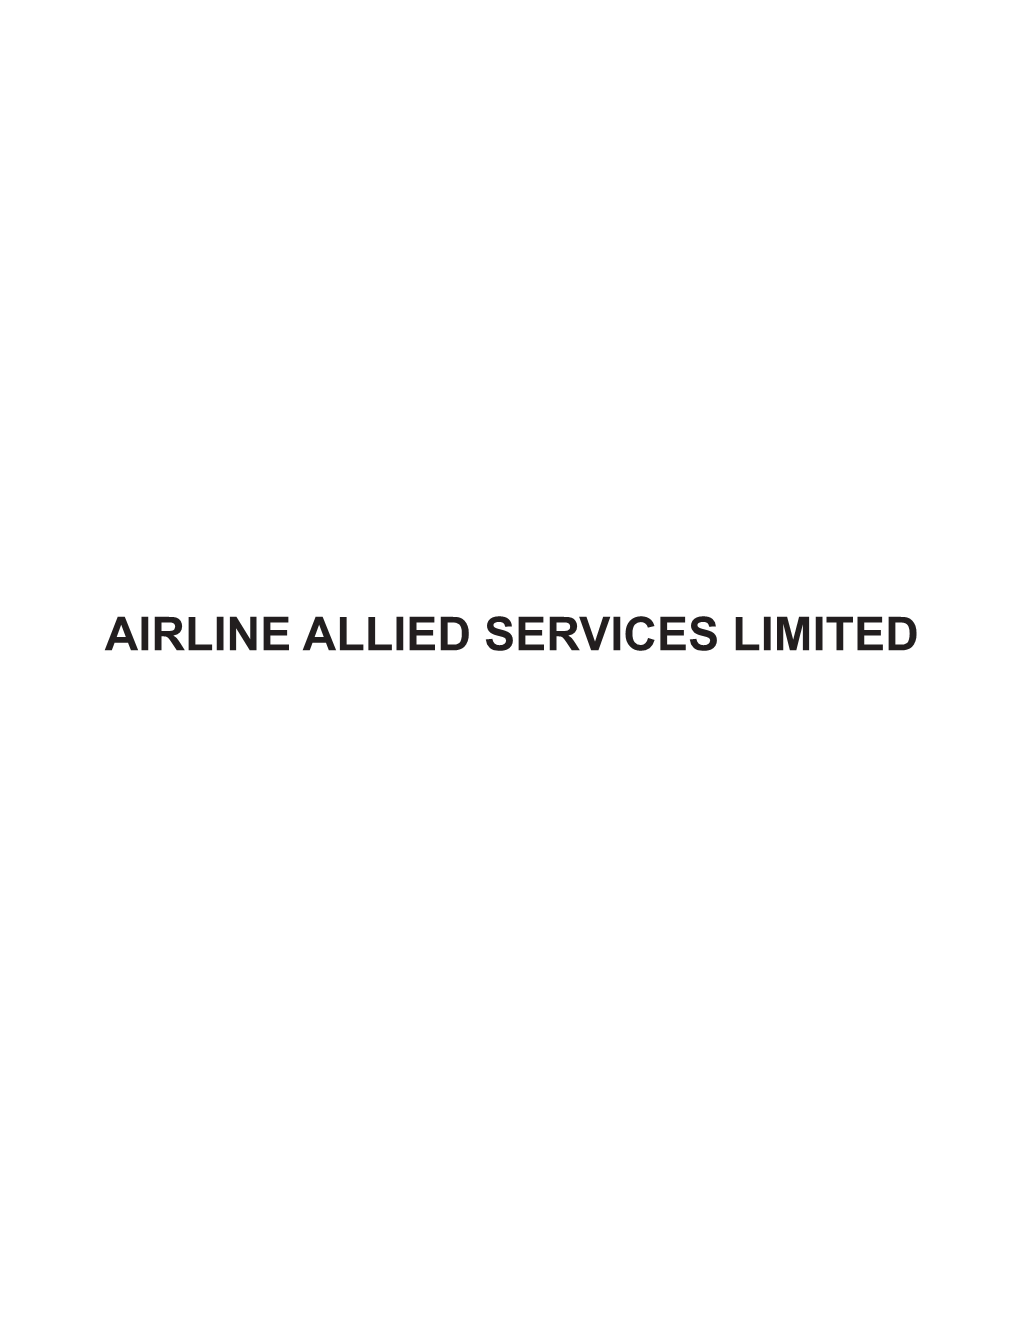 Airline Allied Services Limited Aasl